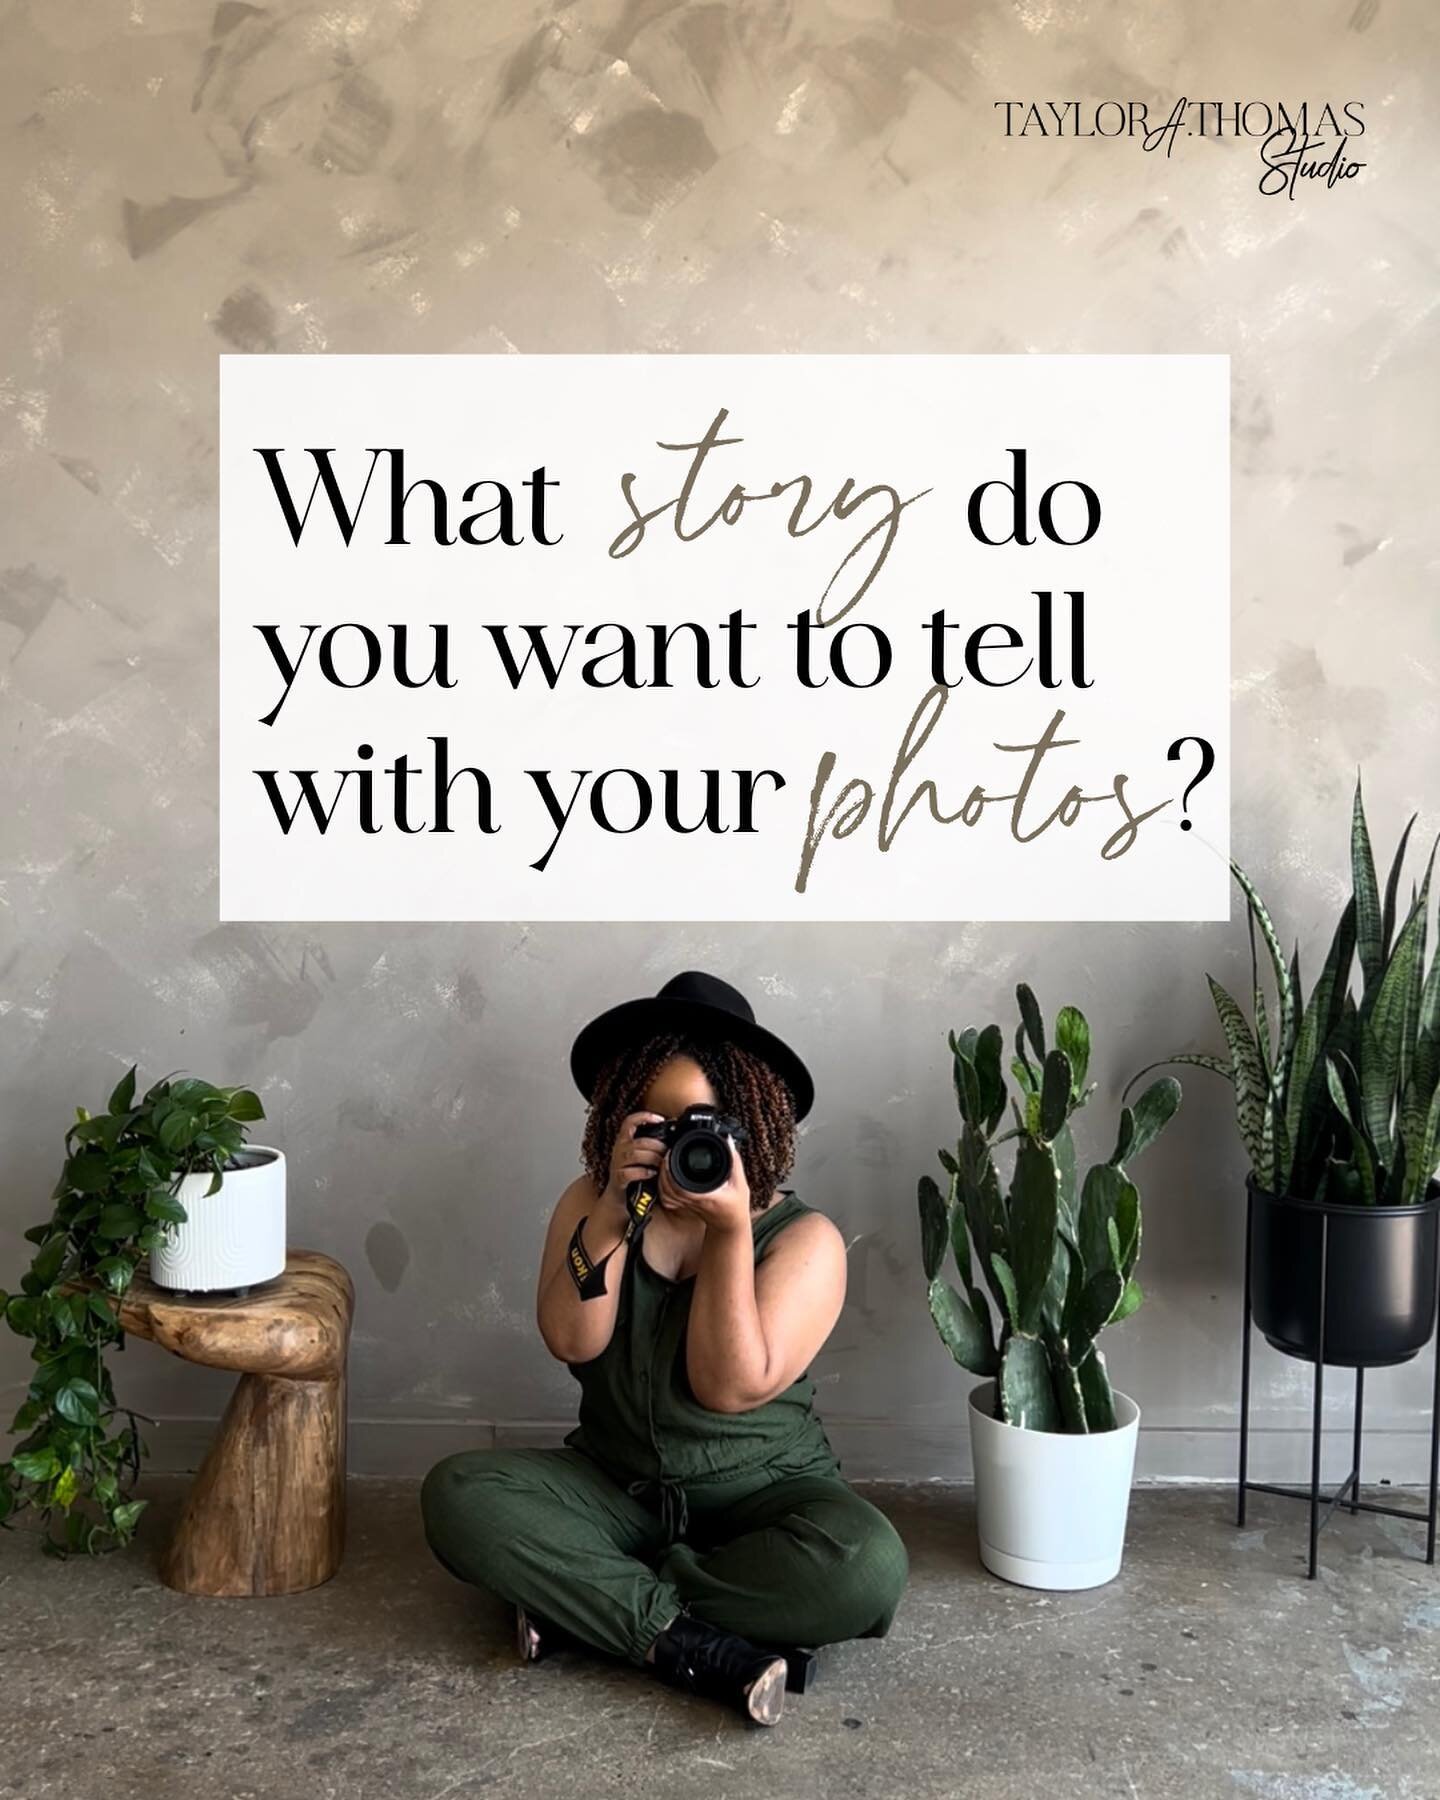 So tell me sis, What story do you want to tell with your photos?

Your photos can curate a certain feeling within your audience that helps them to connect with your messaging with ease.&nbsp;

Along with connecting with your messaging, they will be a